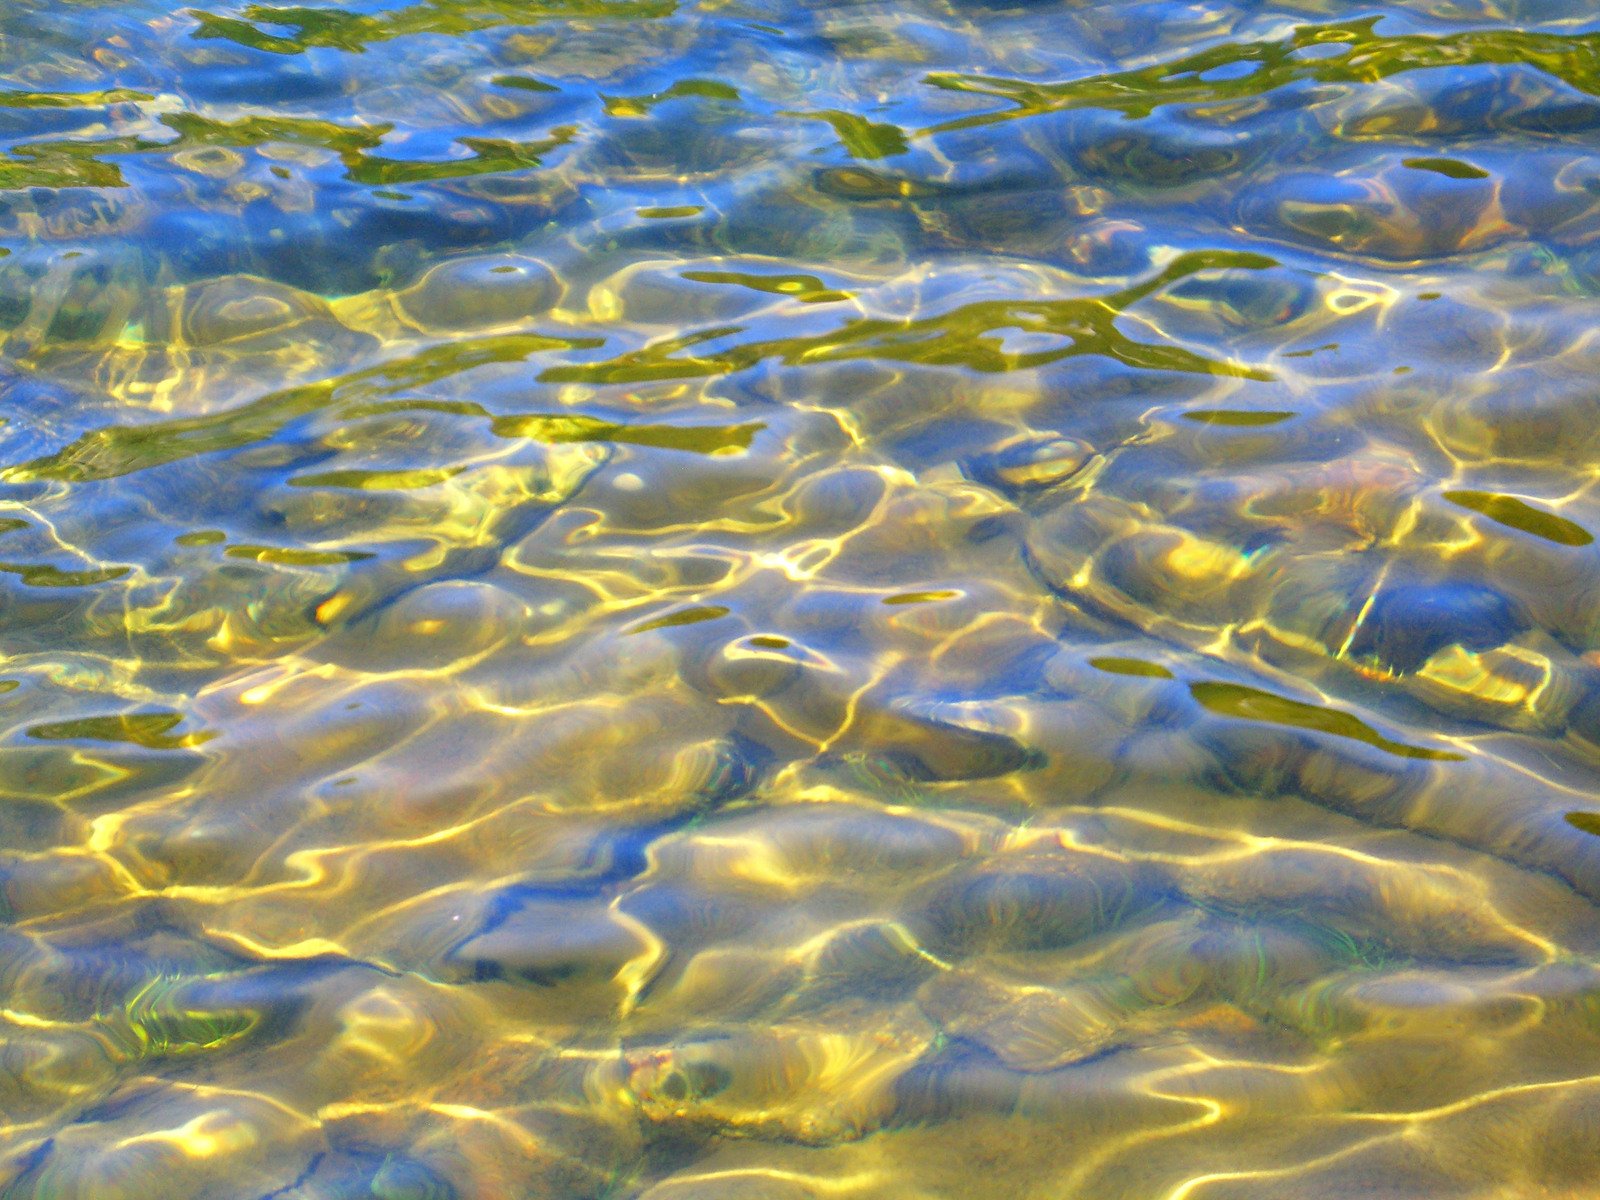 the water is clear and crystal, reflecting light